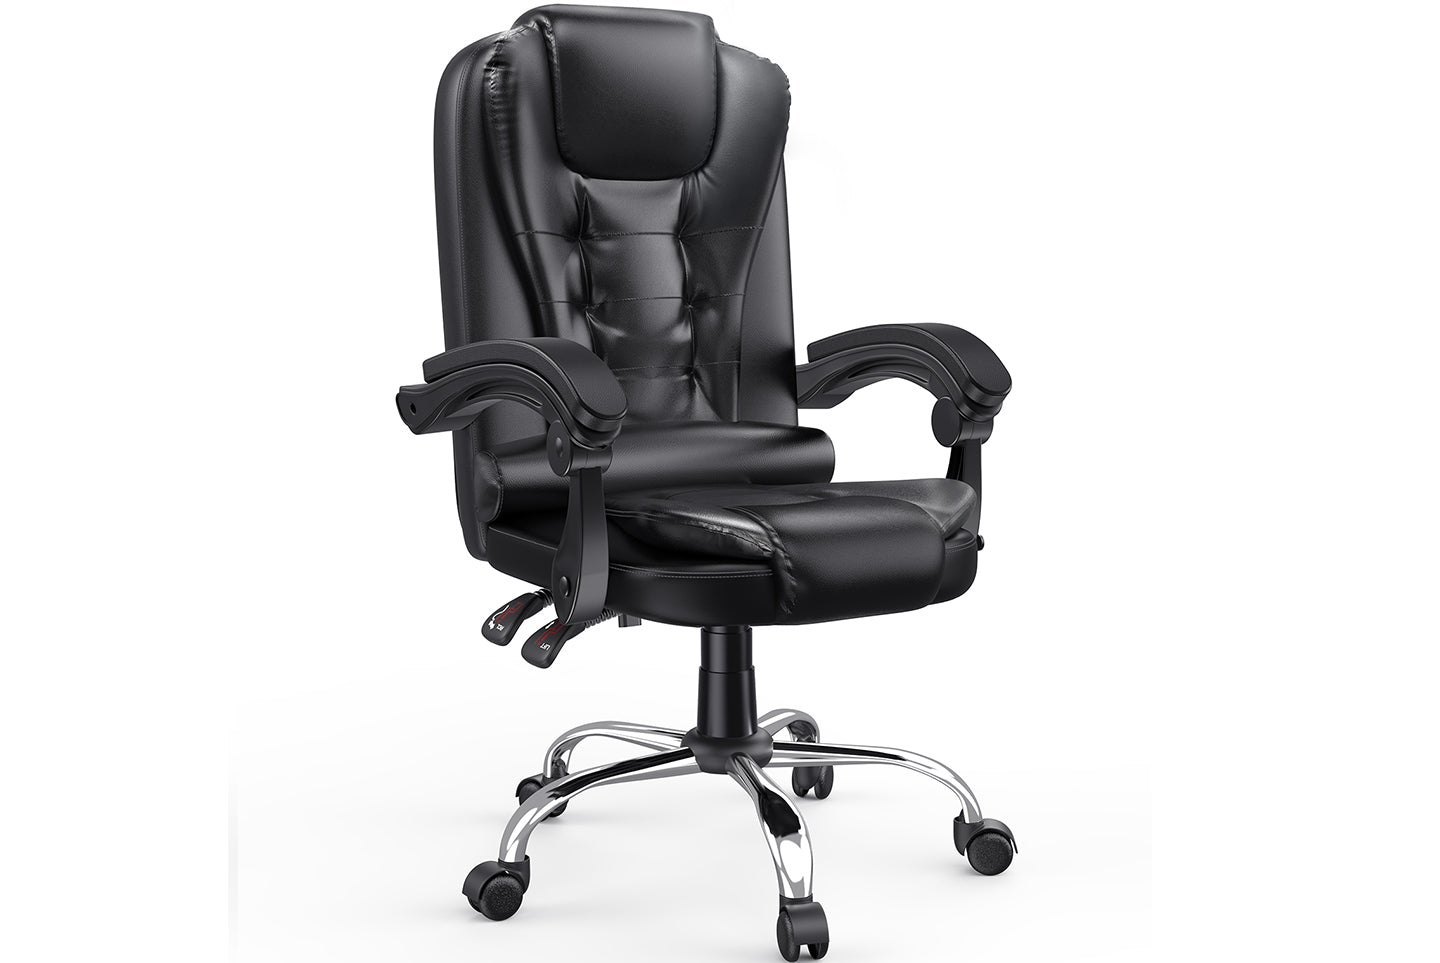 Ergonomic Executive Office Chair PU Leather Computer Desk Chair with Reclining for Home Office Working Black